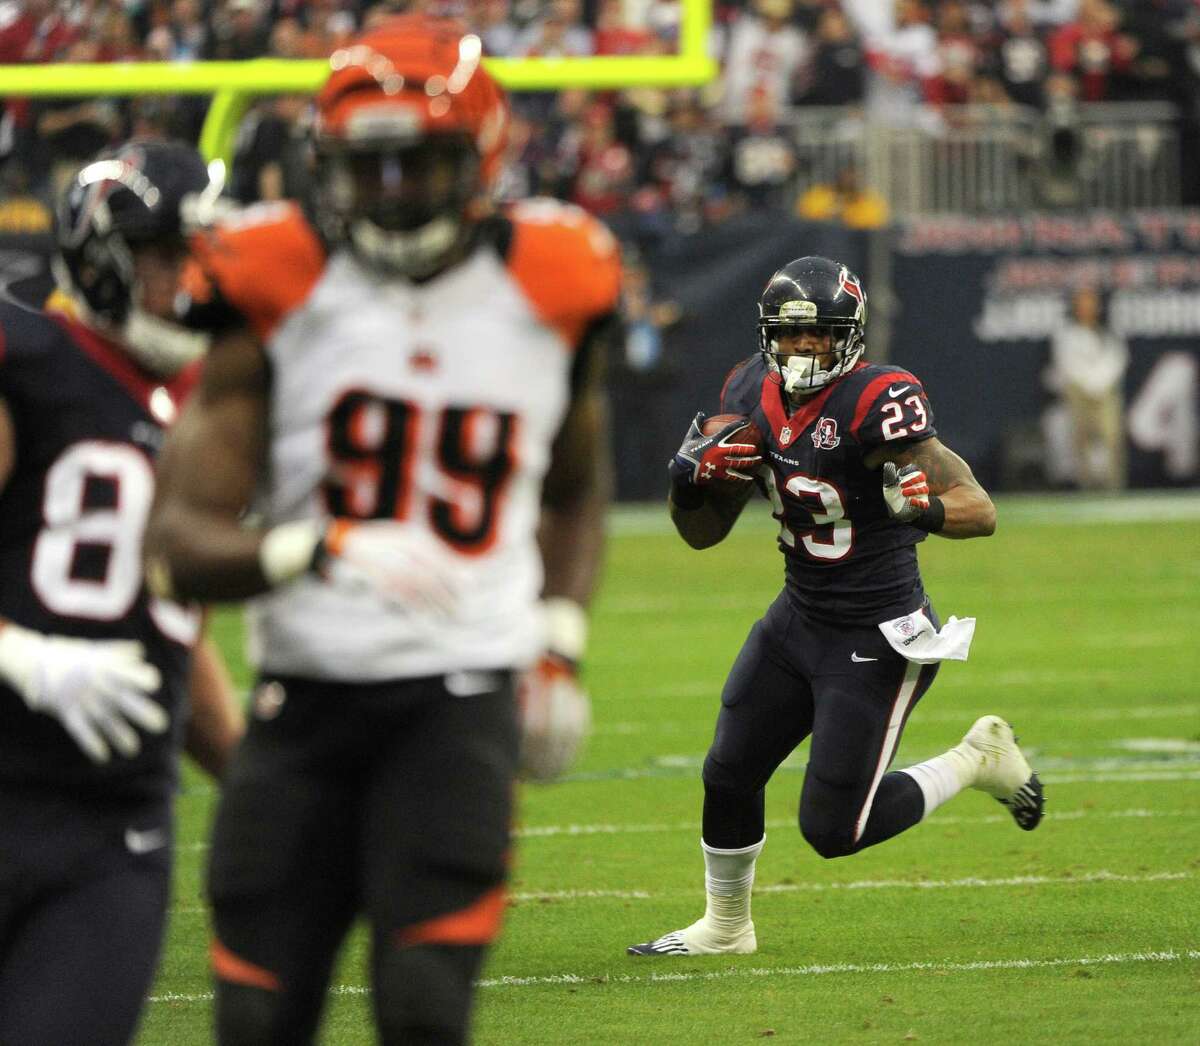 Houston Texans Arian Foster (23) runs during the first quarter of an NFL wild card playoff football game against the Cincinnati Bengals, Saturday, Jan. 5, 2013, in Houston. (AP Photo/Dave Einsel)